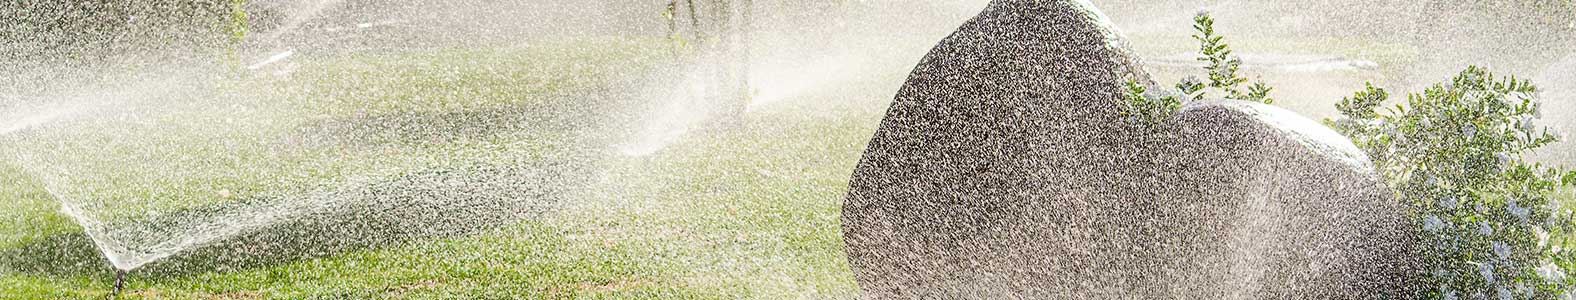 Do you need your sprinkler system serviced? Call us today!